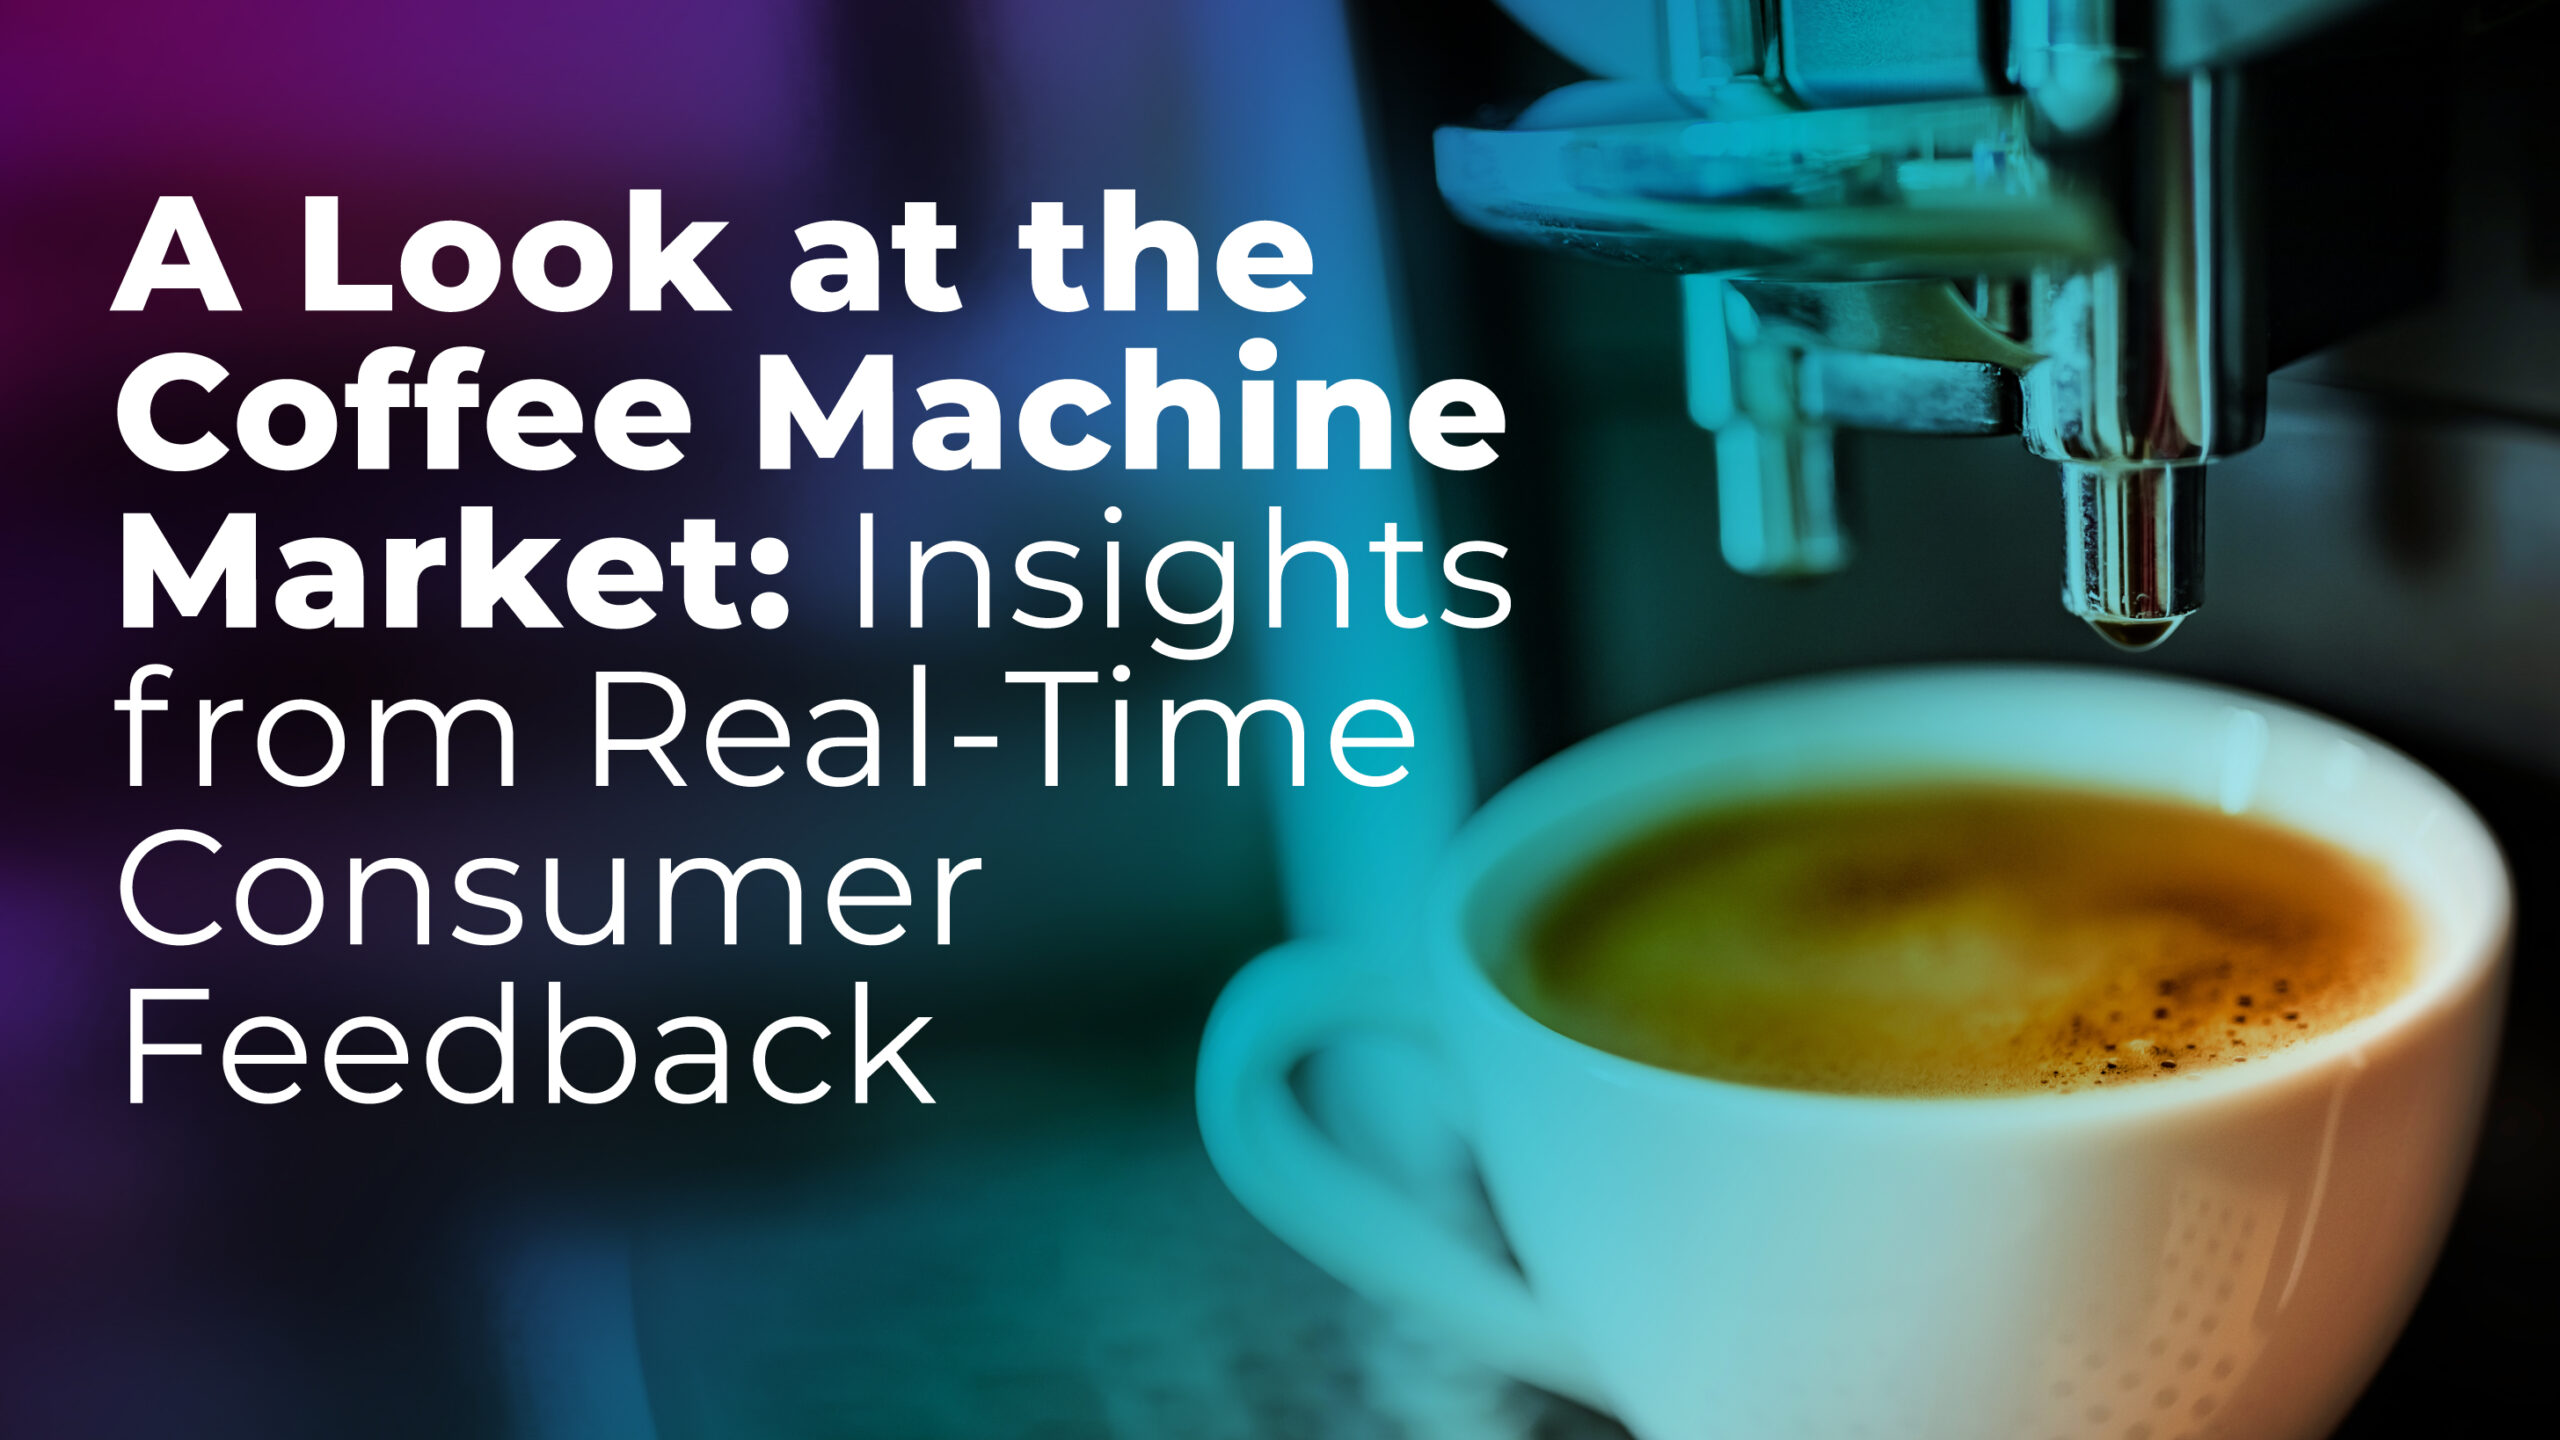 A Look at the Coffee Machine Market: Insights from Real-Time Consumer Feedback